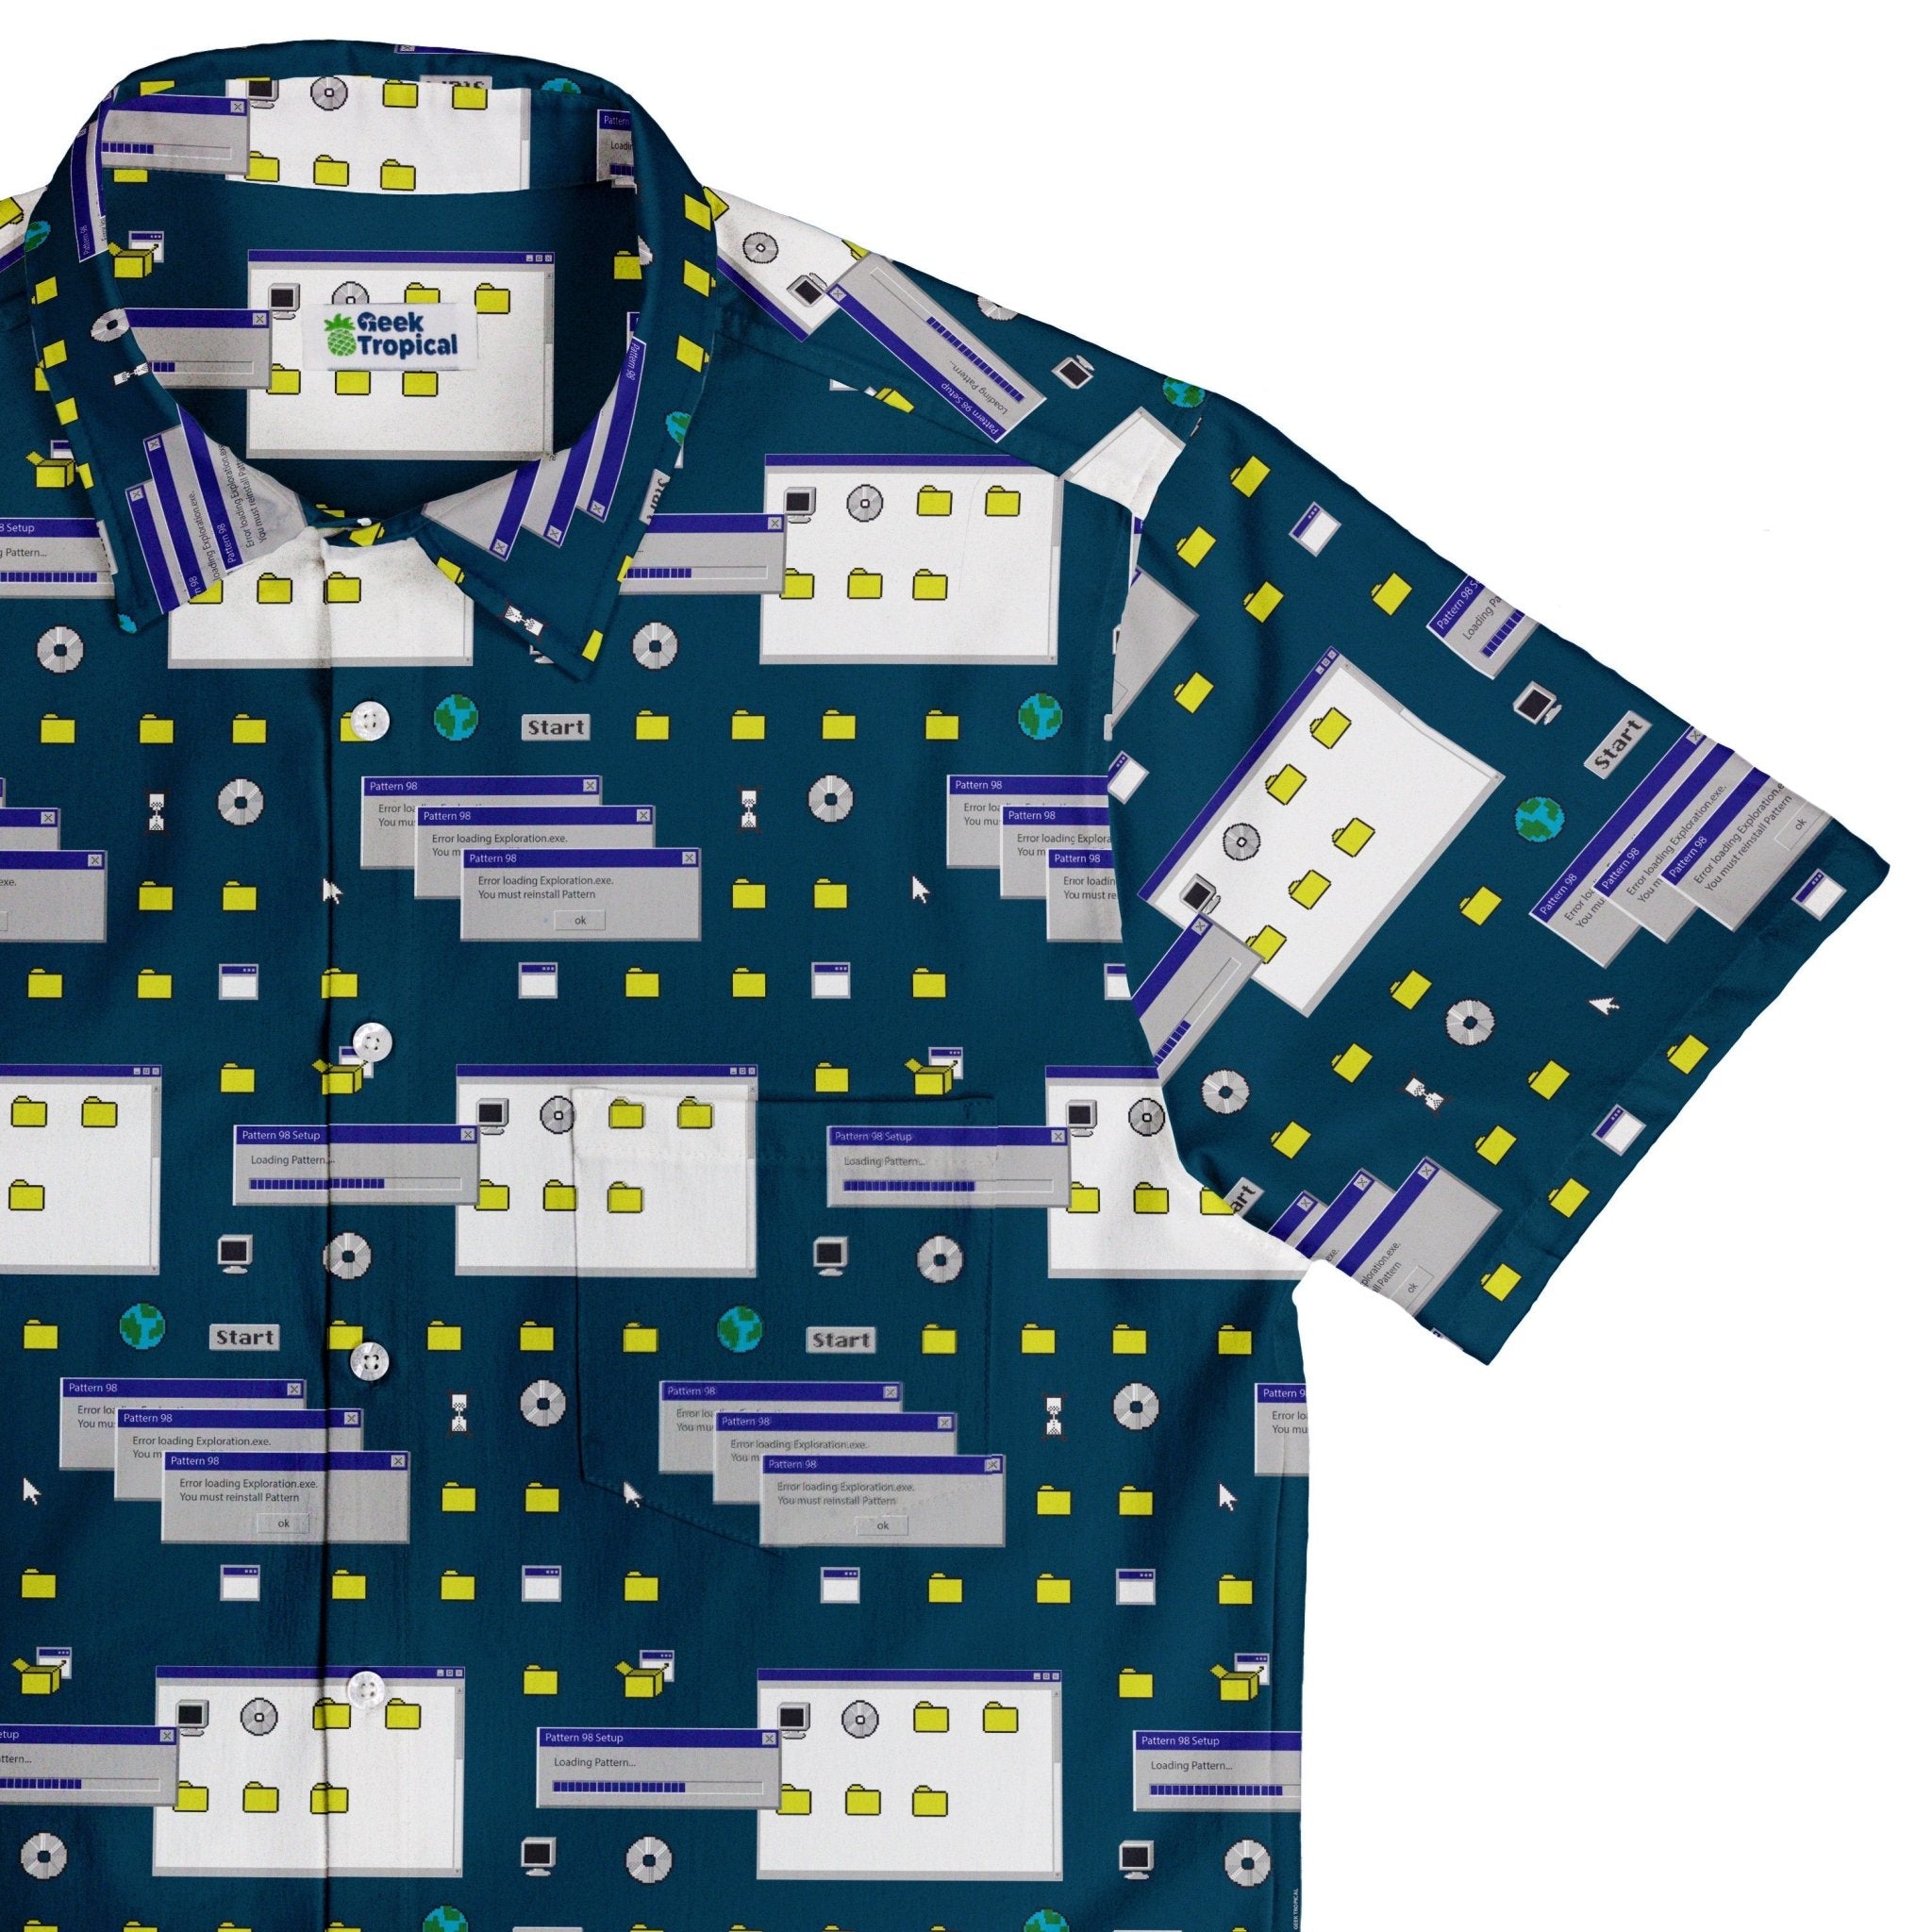 Dark Pattern98 Button Up Shirt - adult sizing - computer print - Design by Claire Murphy